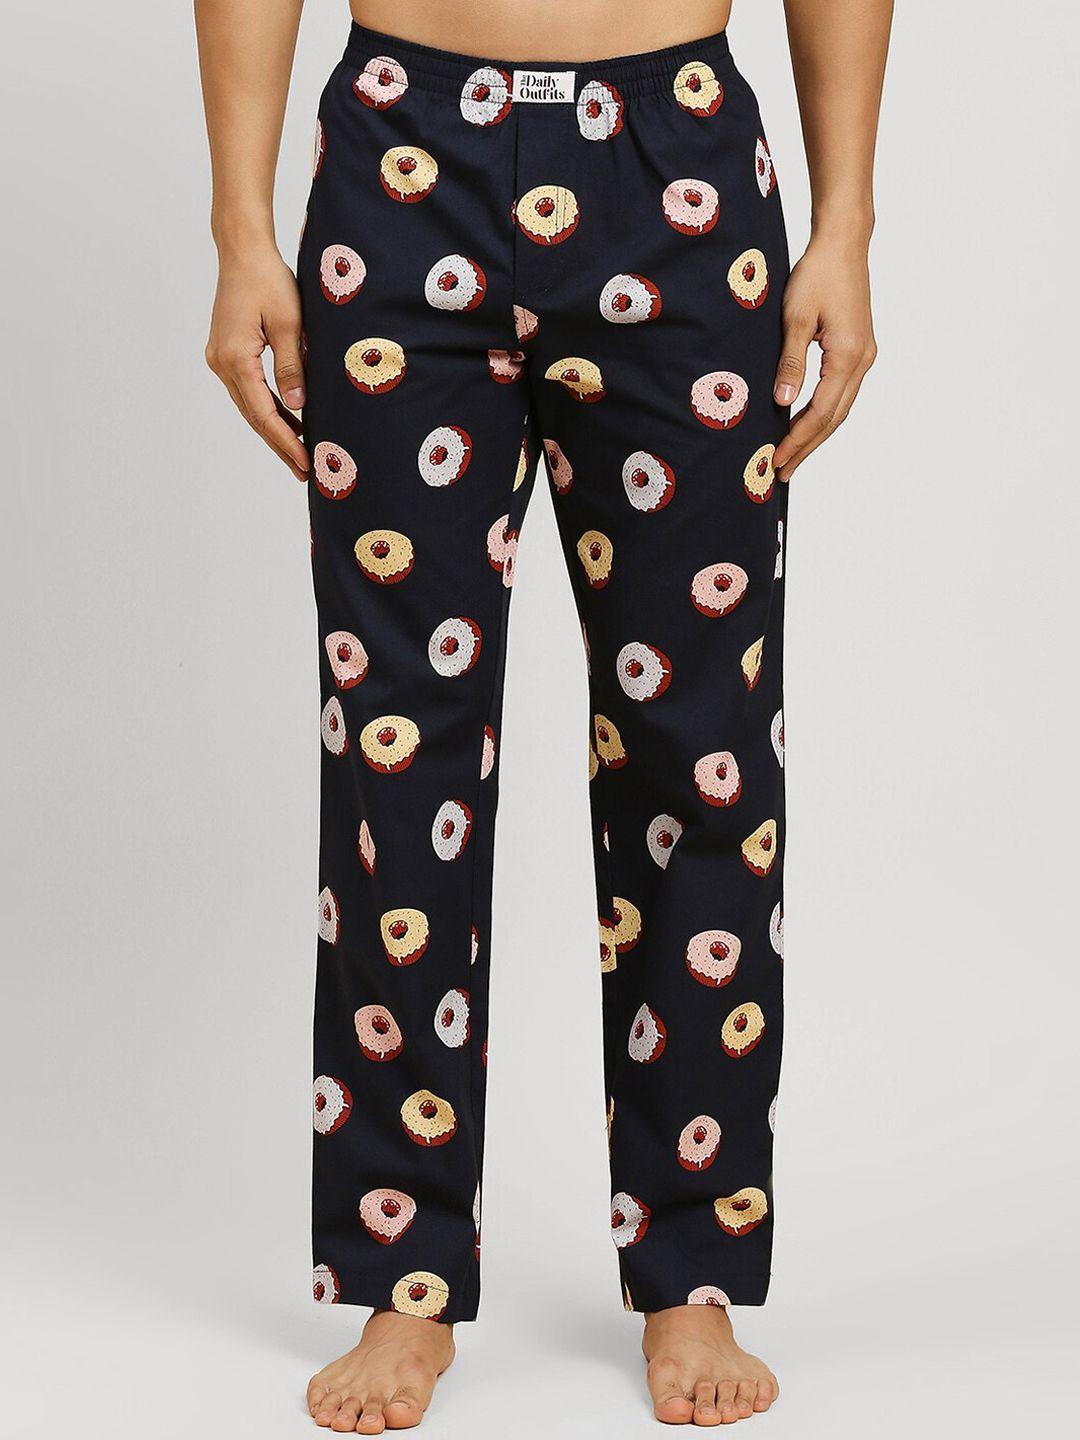 the daily outfits conversational printed mid rise cotton lounge pants